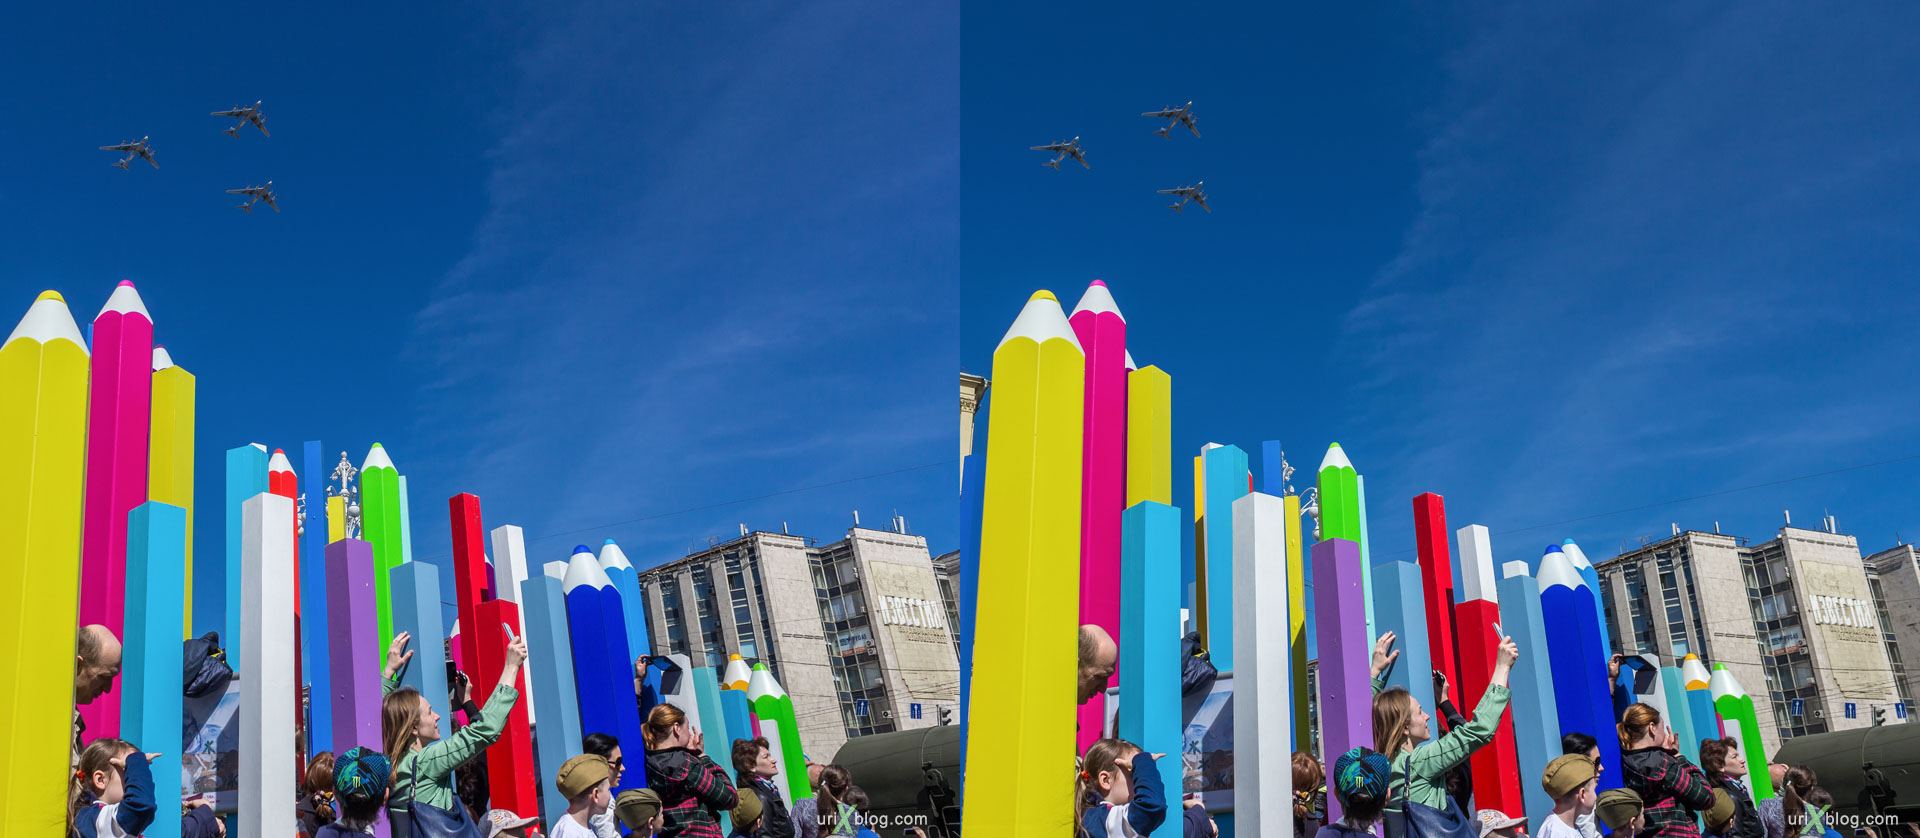 parade, aviation, airplanes, 9 may, victory day, rehearsal, pencils, Moscow, Russia, 3D, stereo pair, cross-eyed, crossview, cross view stereo pair, stereoscopic, 2015